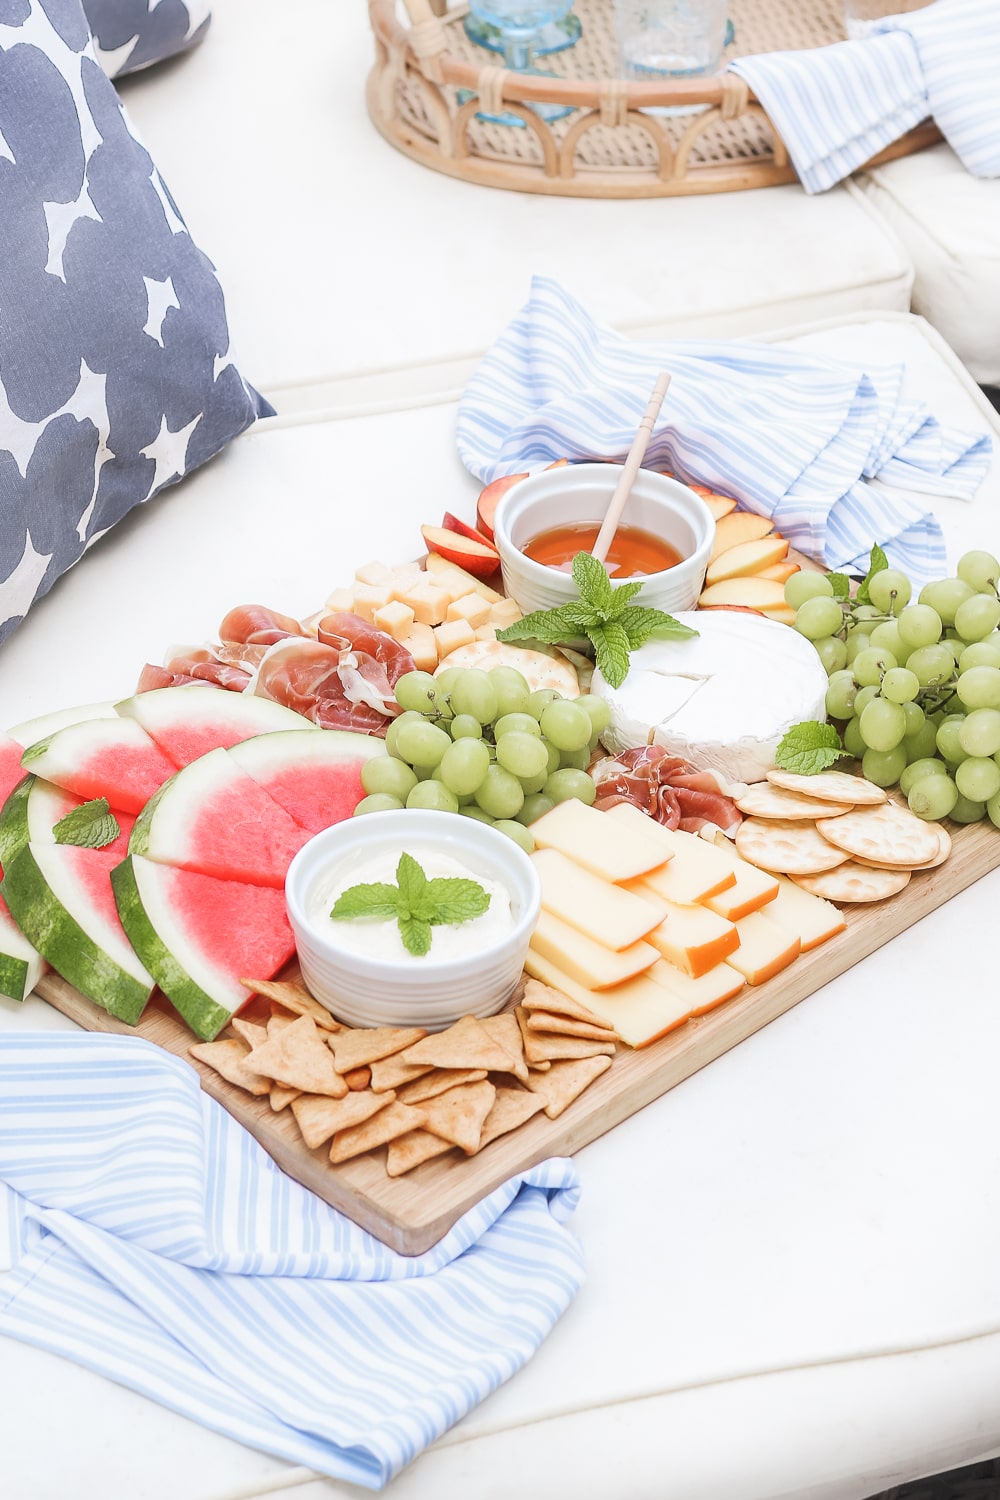 Blogger Stephanie Ziajka shares tips for building the perfect summer charcuterie board on Diary of a Debutante